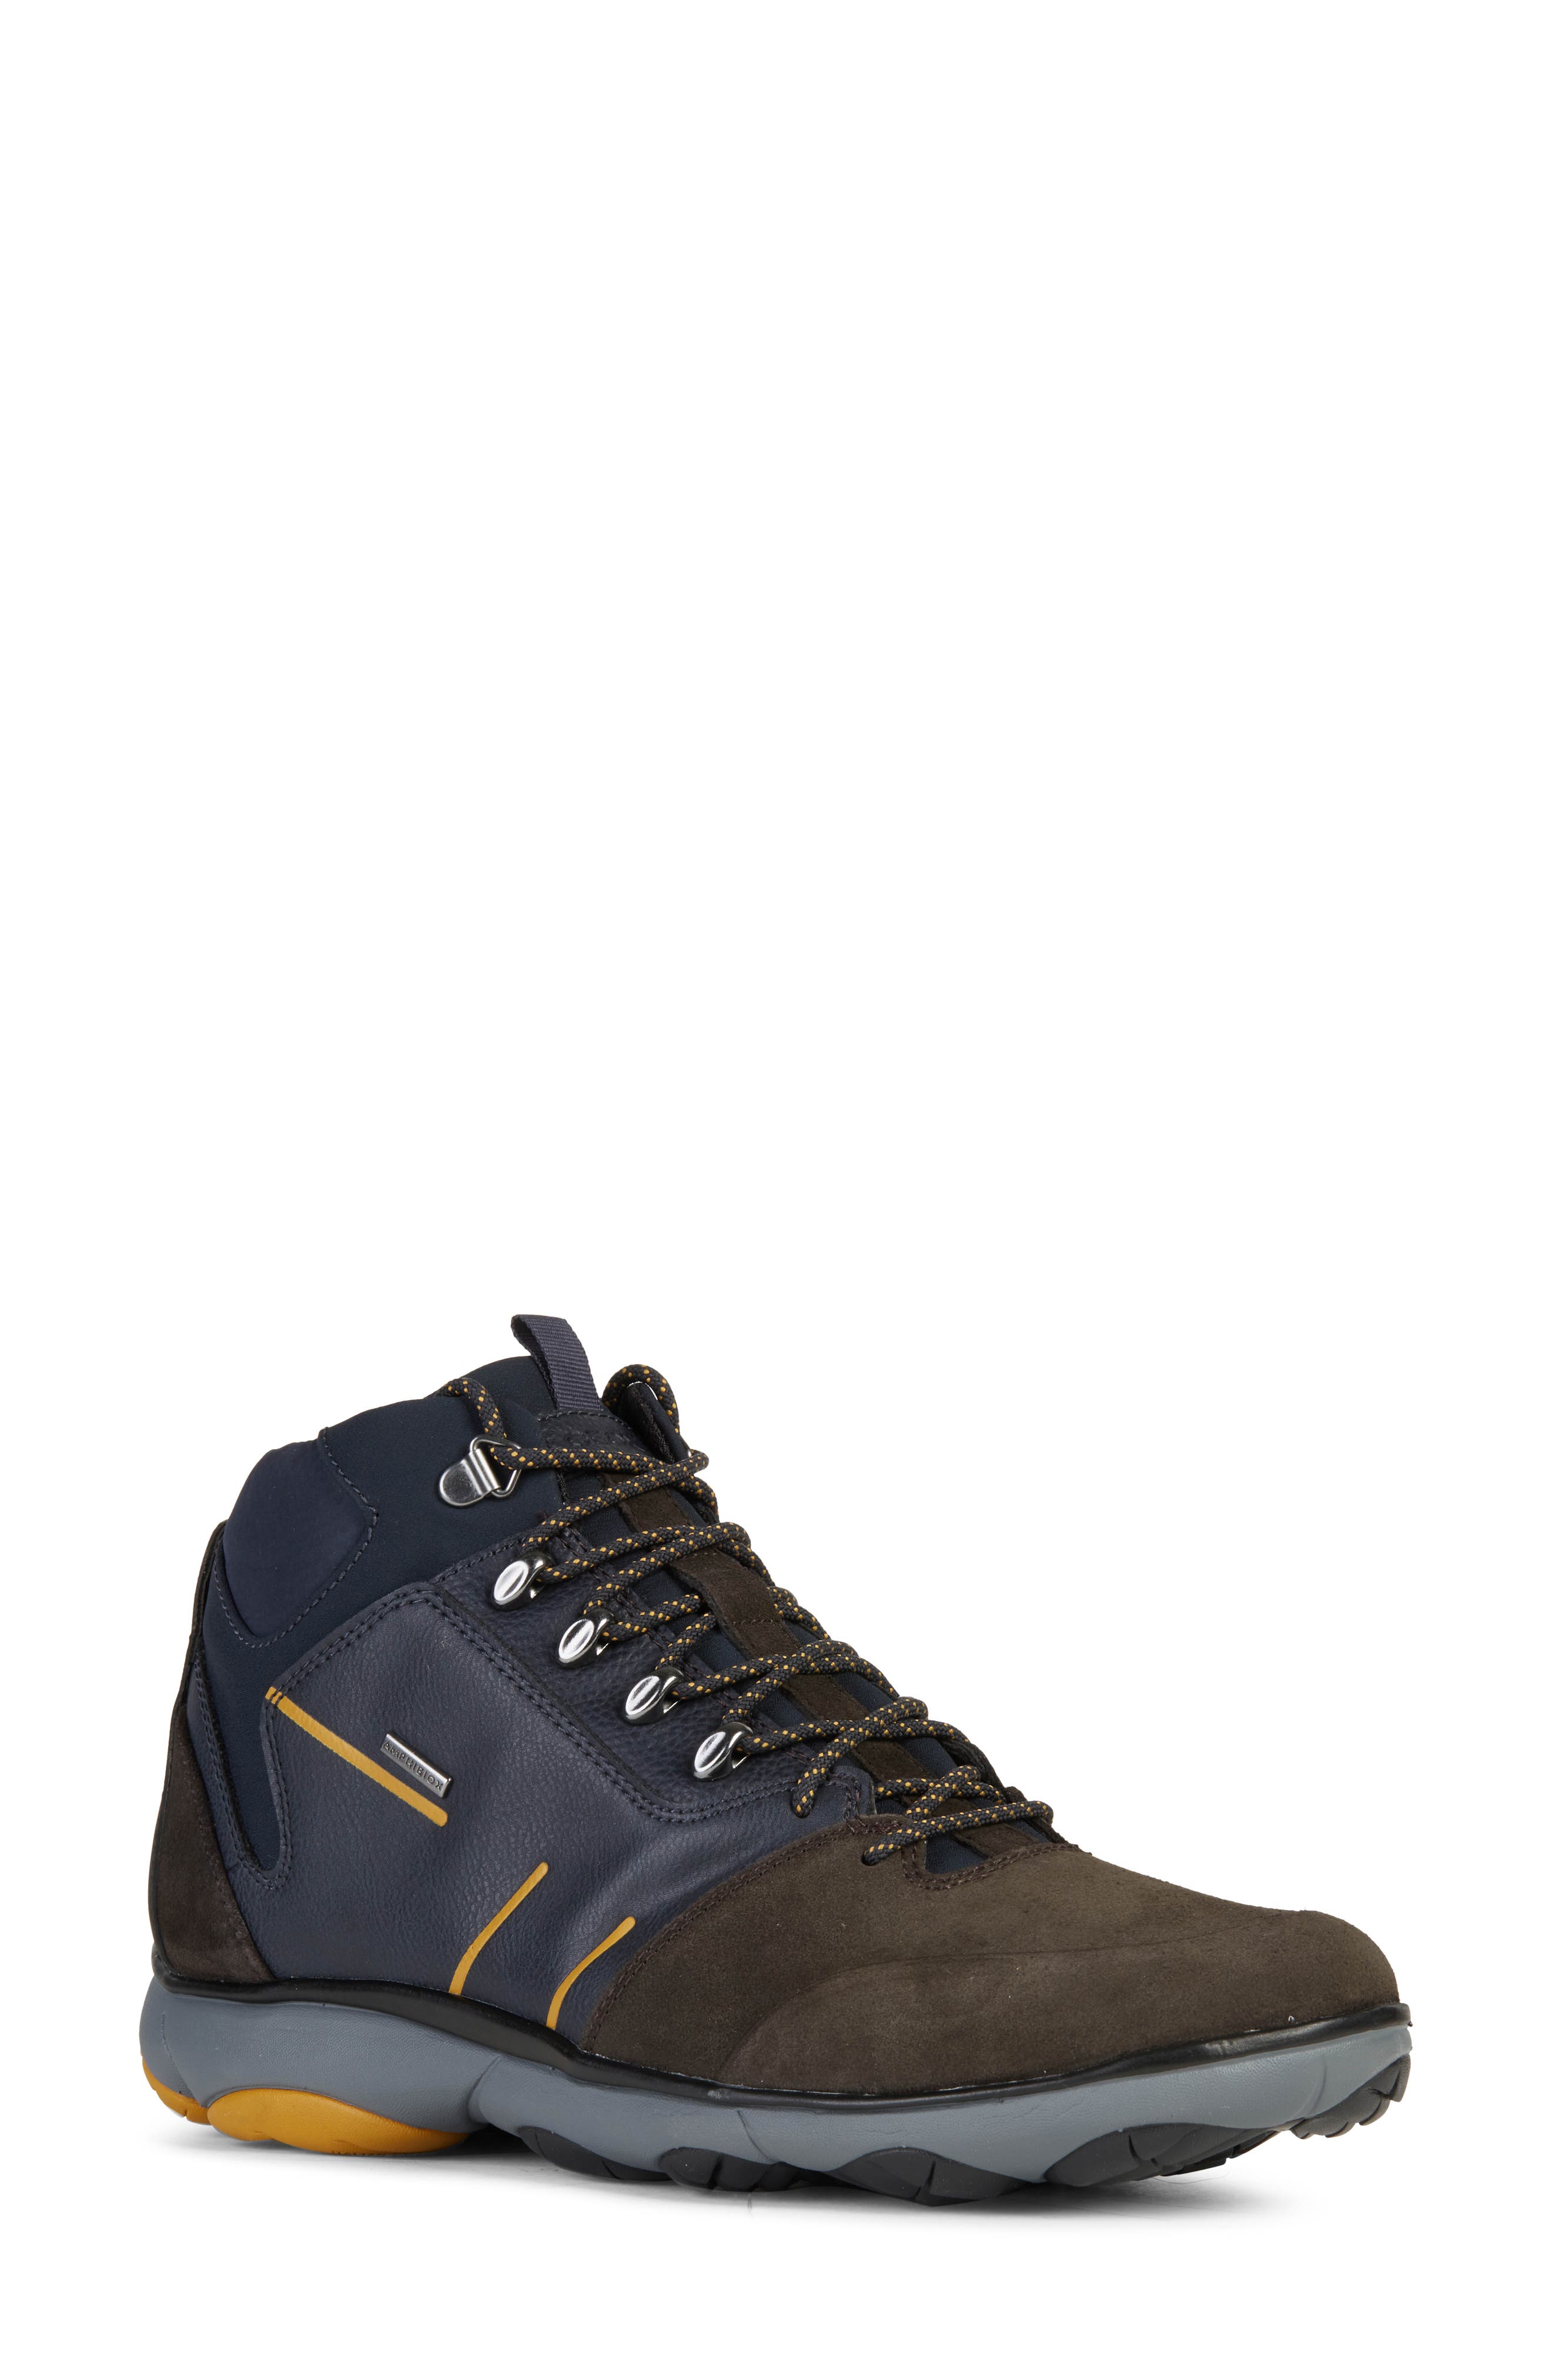 geox shoes price